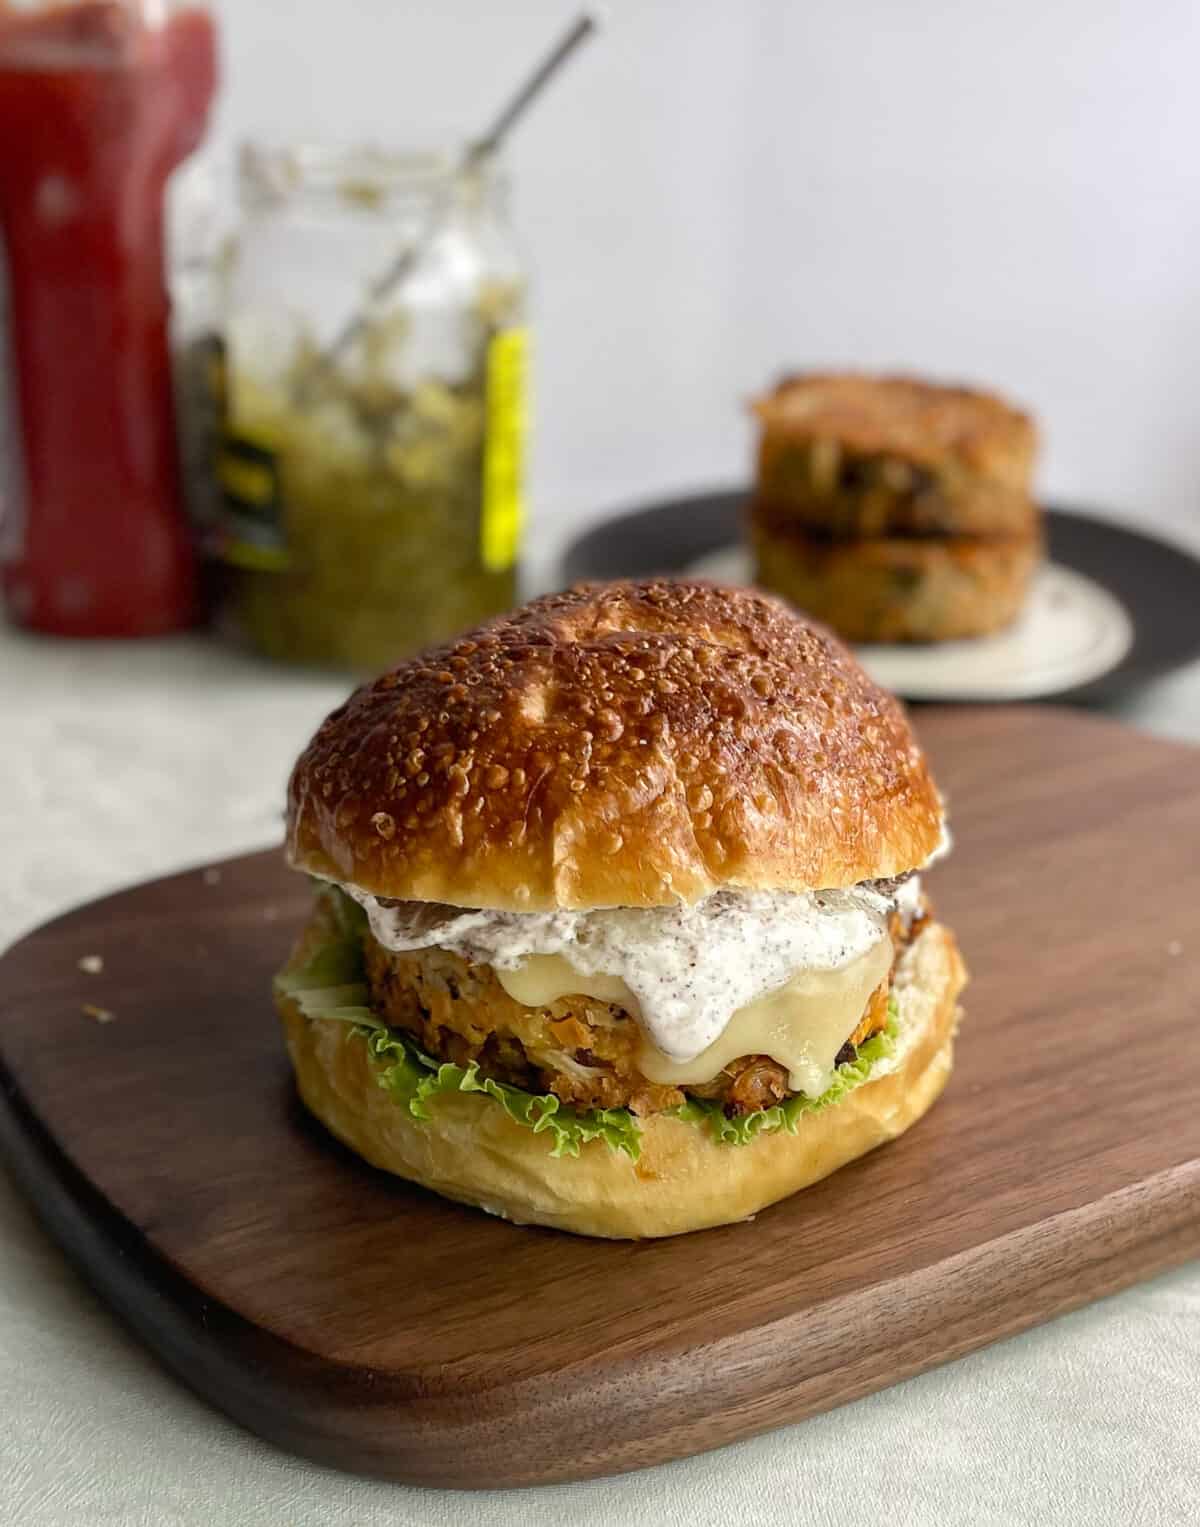 a cauliflower burger on a pretzel bun with cheese and lettuce with ketchup and relish in background.